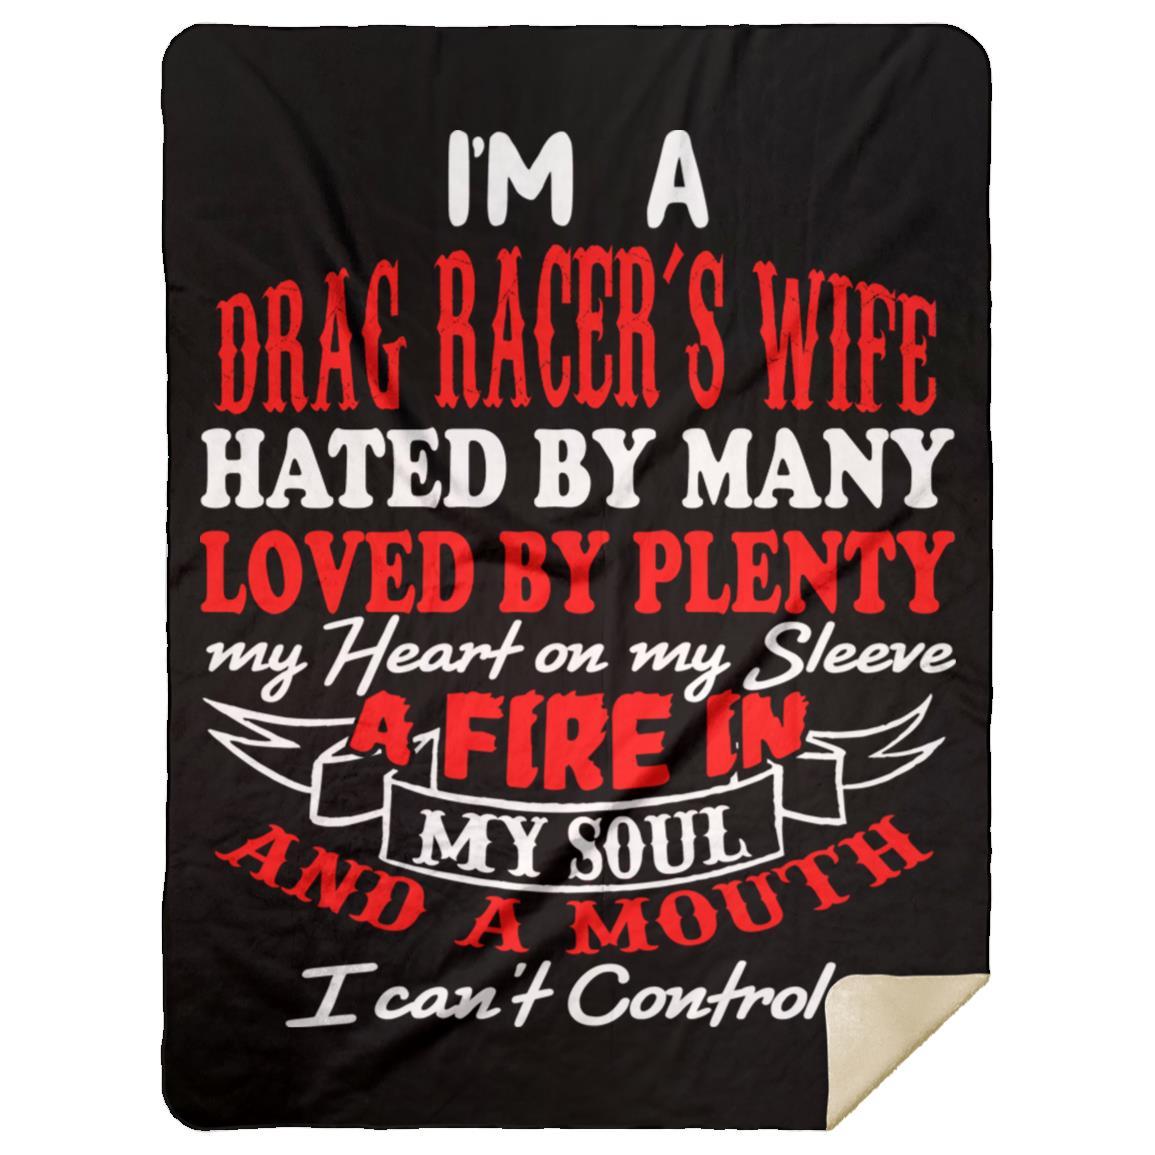 I'm A Drag Racer's Wife Hated By Many Loved By Plenty Premium Mink Sherpa Blanket 60x80